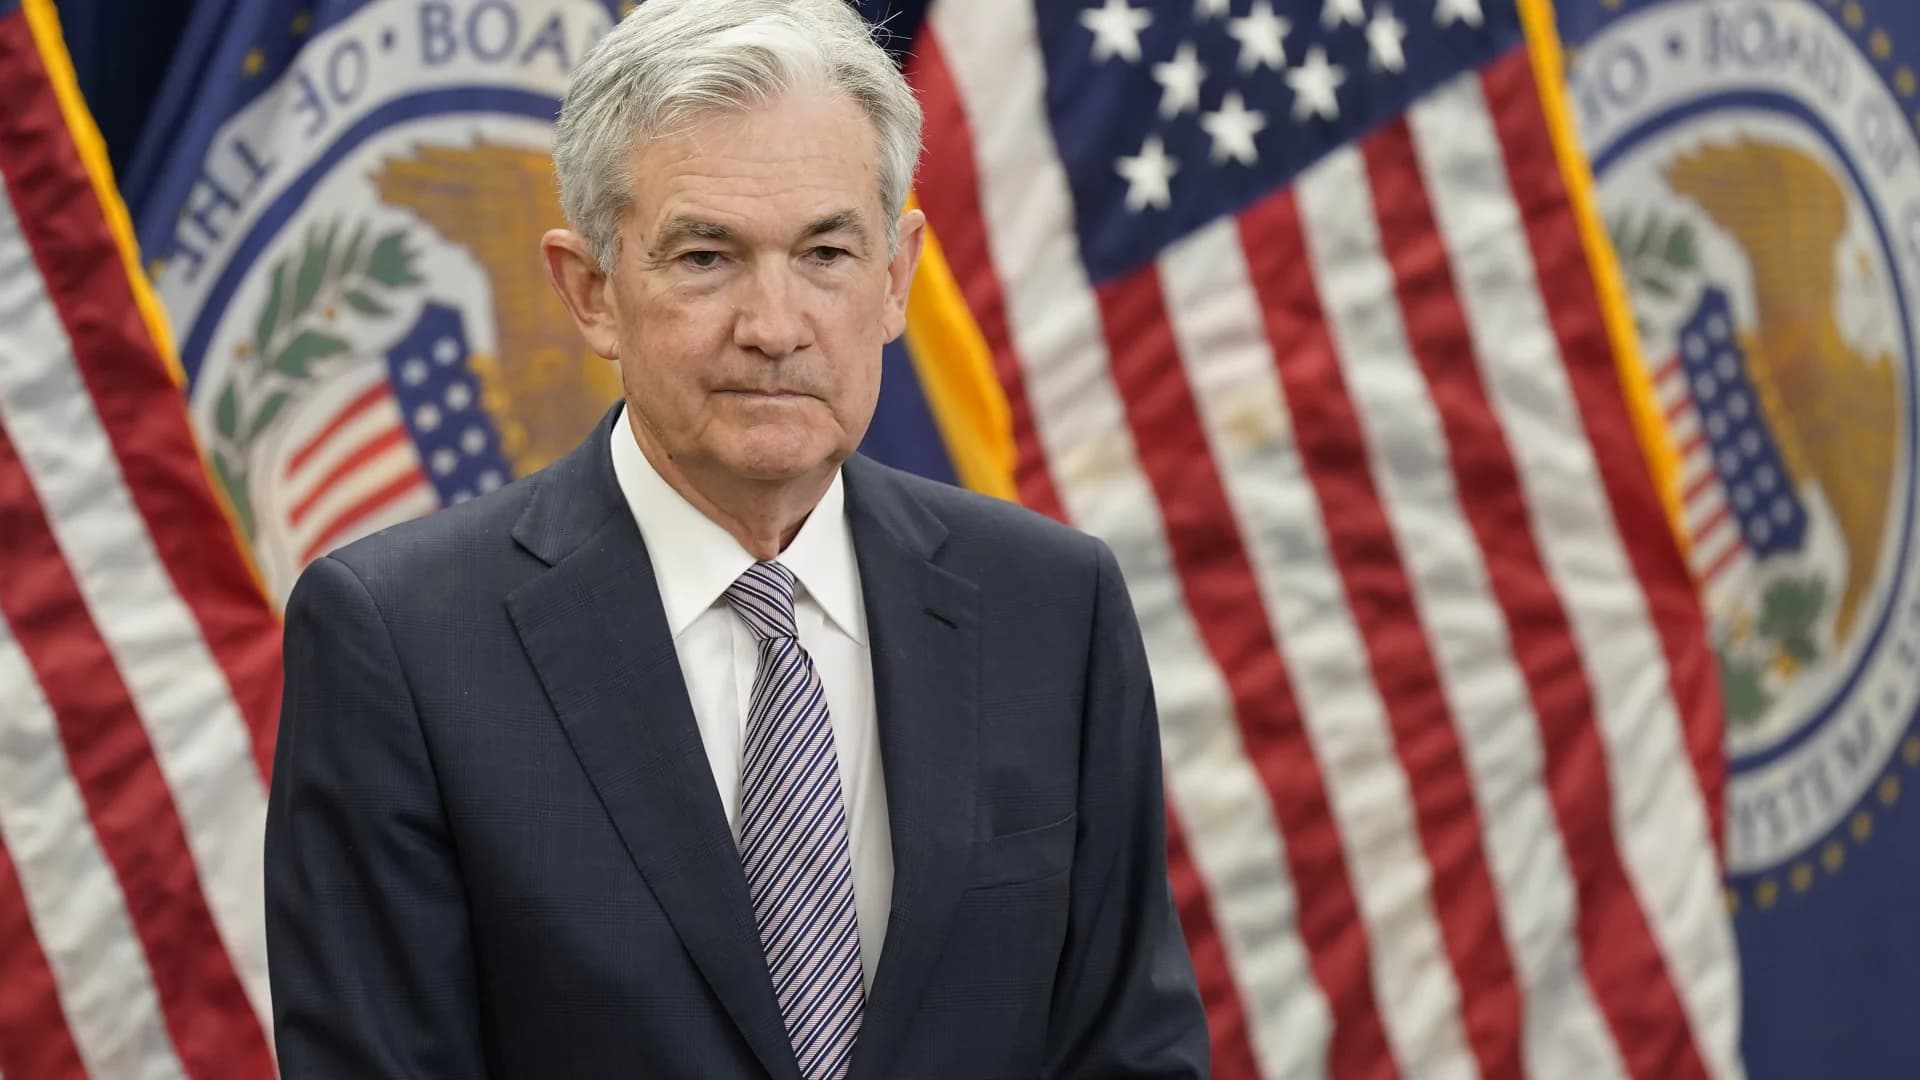 What is the 'yield curve' and how can it signal an economic recession?